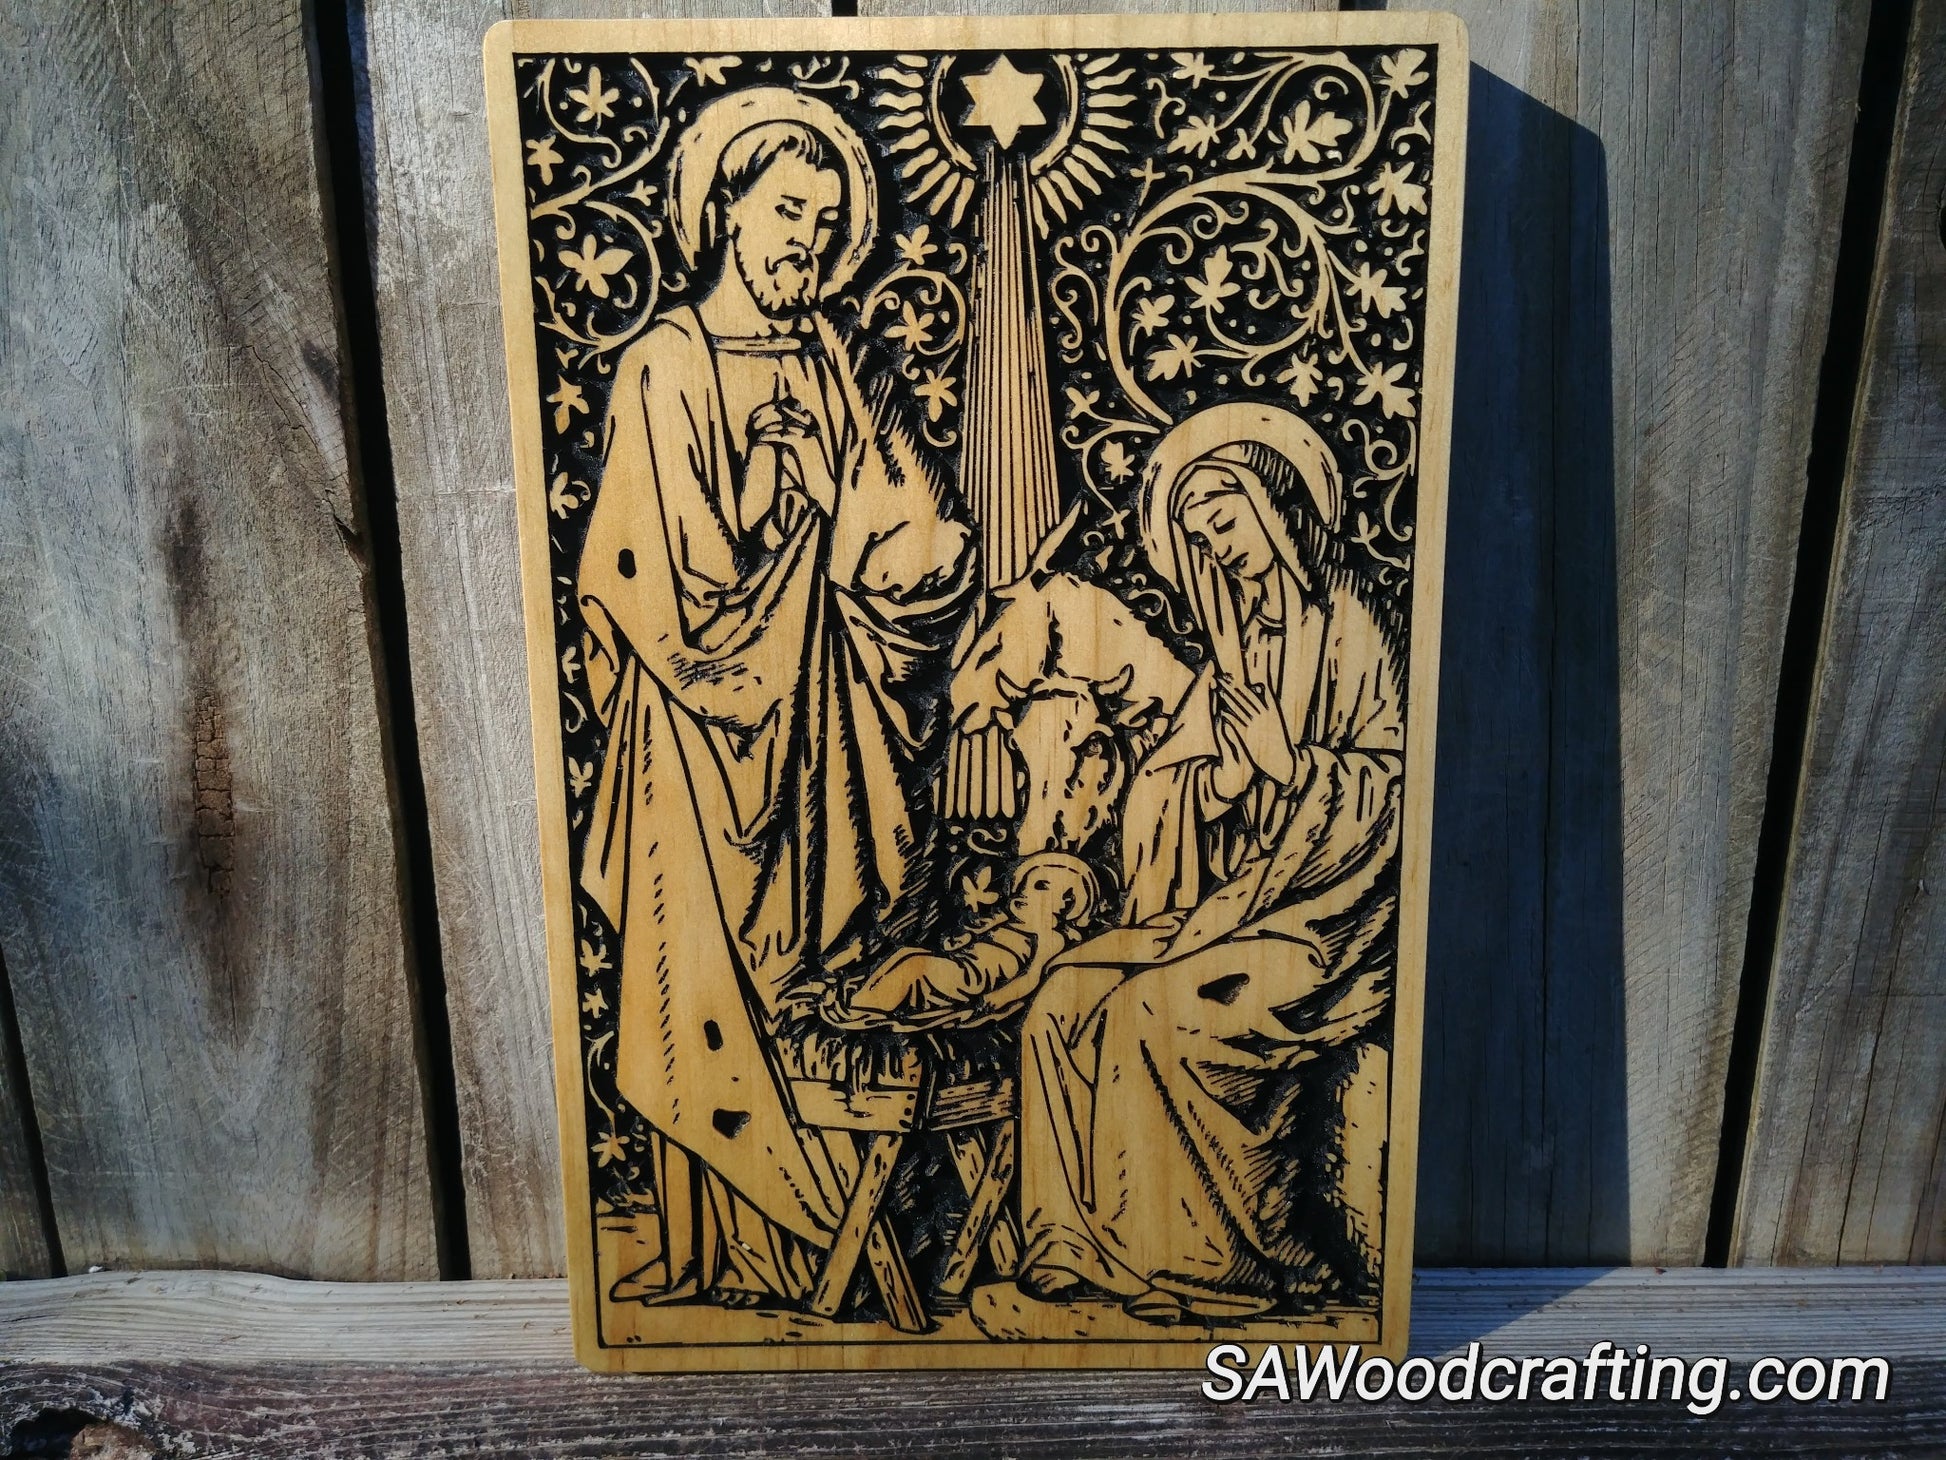 Wood engraved Christian nativity scene religious gifts for her and religious gifts for him. Christian gifts and faith gifts made in the USA.